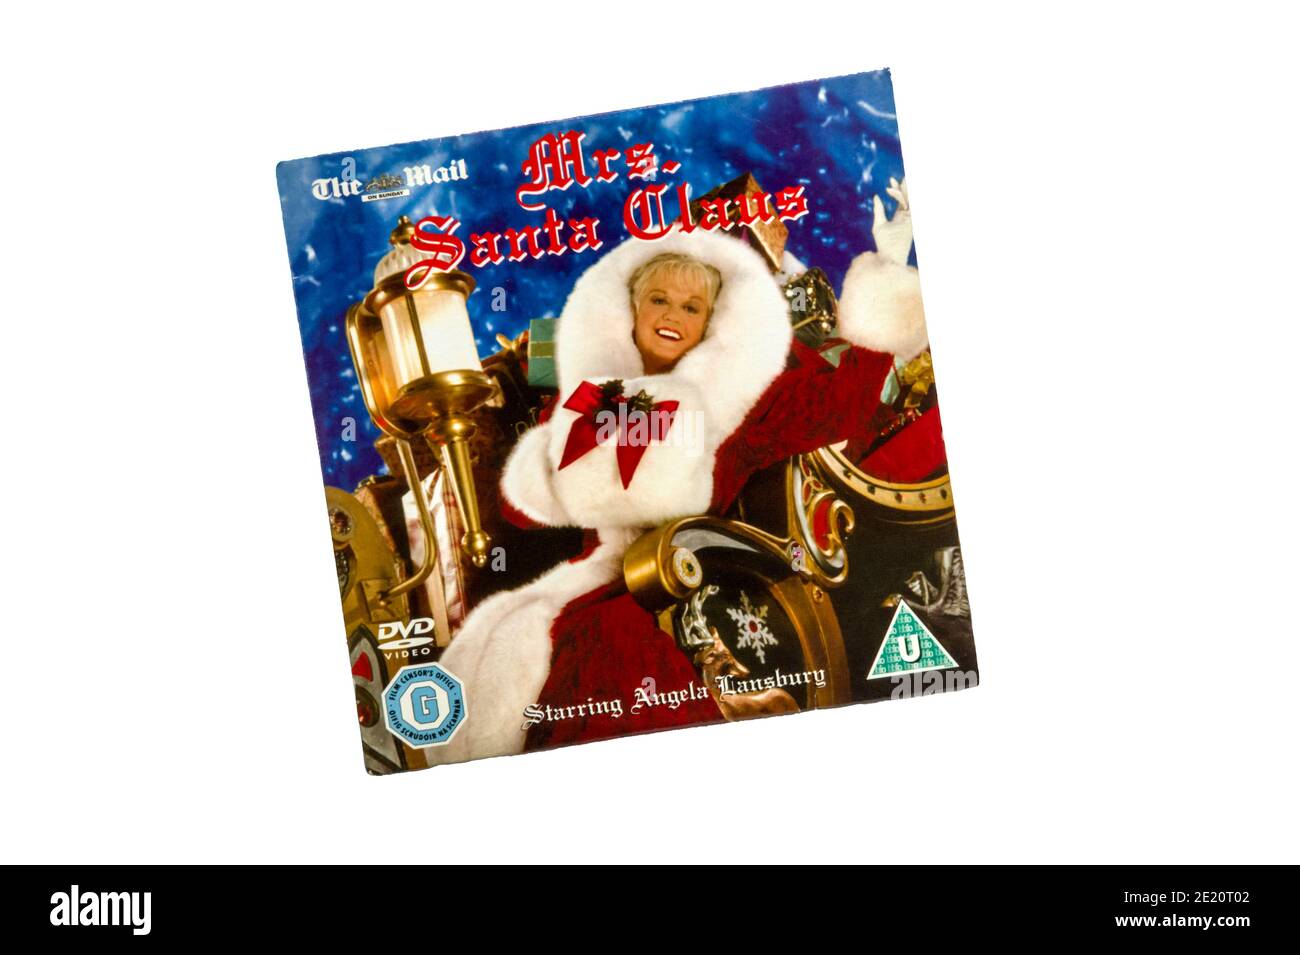 A copy of Mrs Santa Claus starring Angela Lansbury. An American made-for-TV film, given away free with the Daily Mail newspaper. Stock Photo